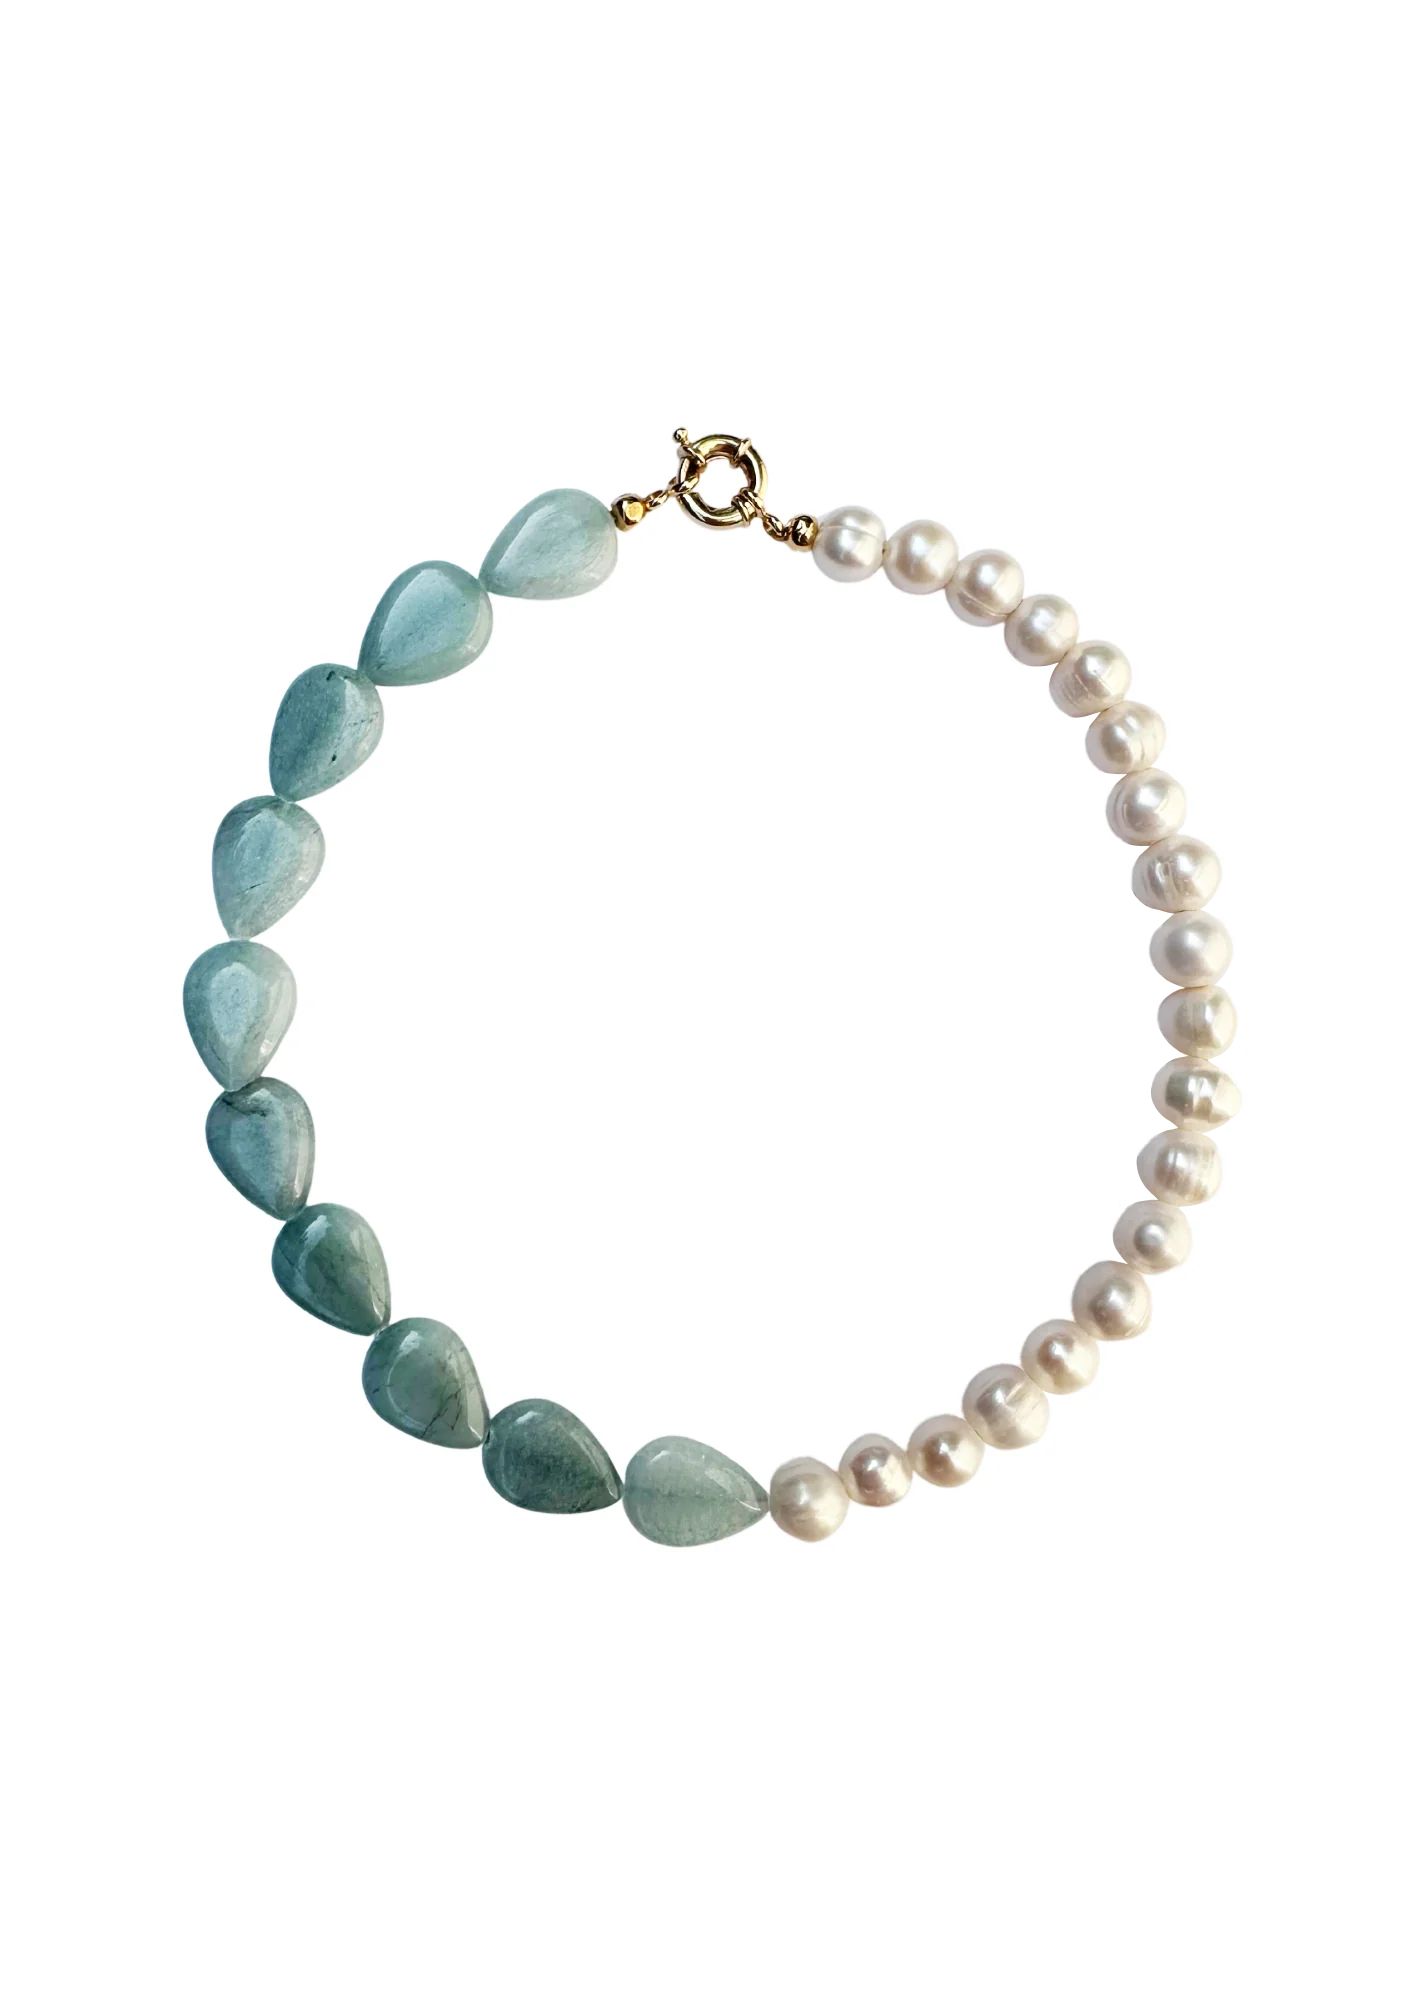 Limited Edition: Freshwater Pearl & Blue Teardrop Necklace | Nicola Bathie Jewelry